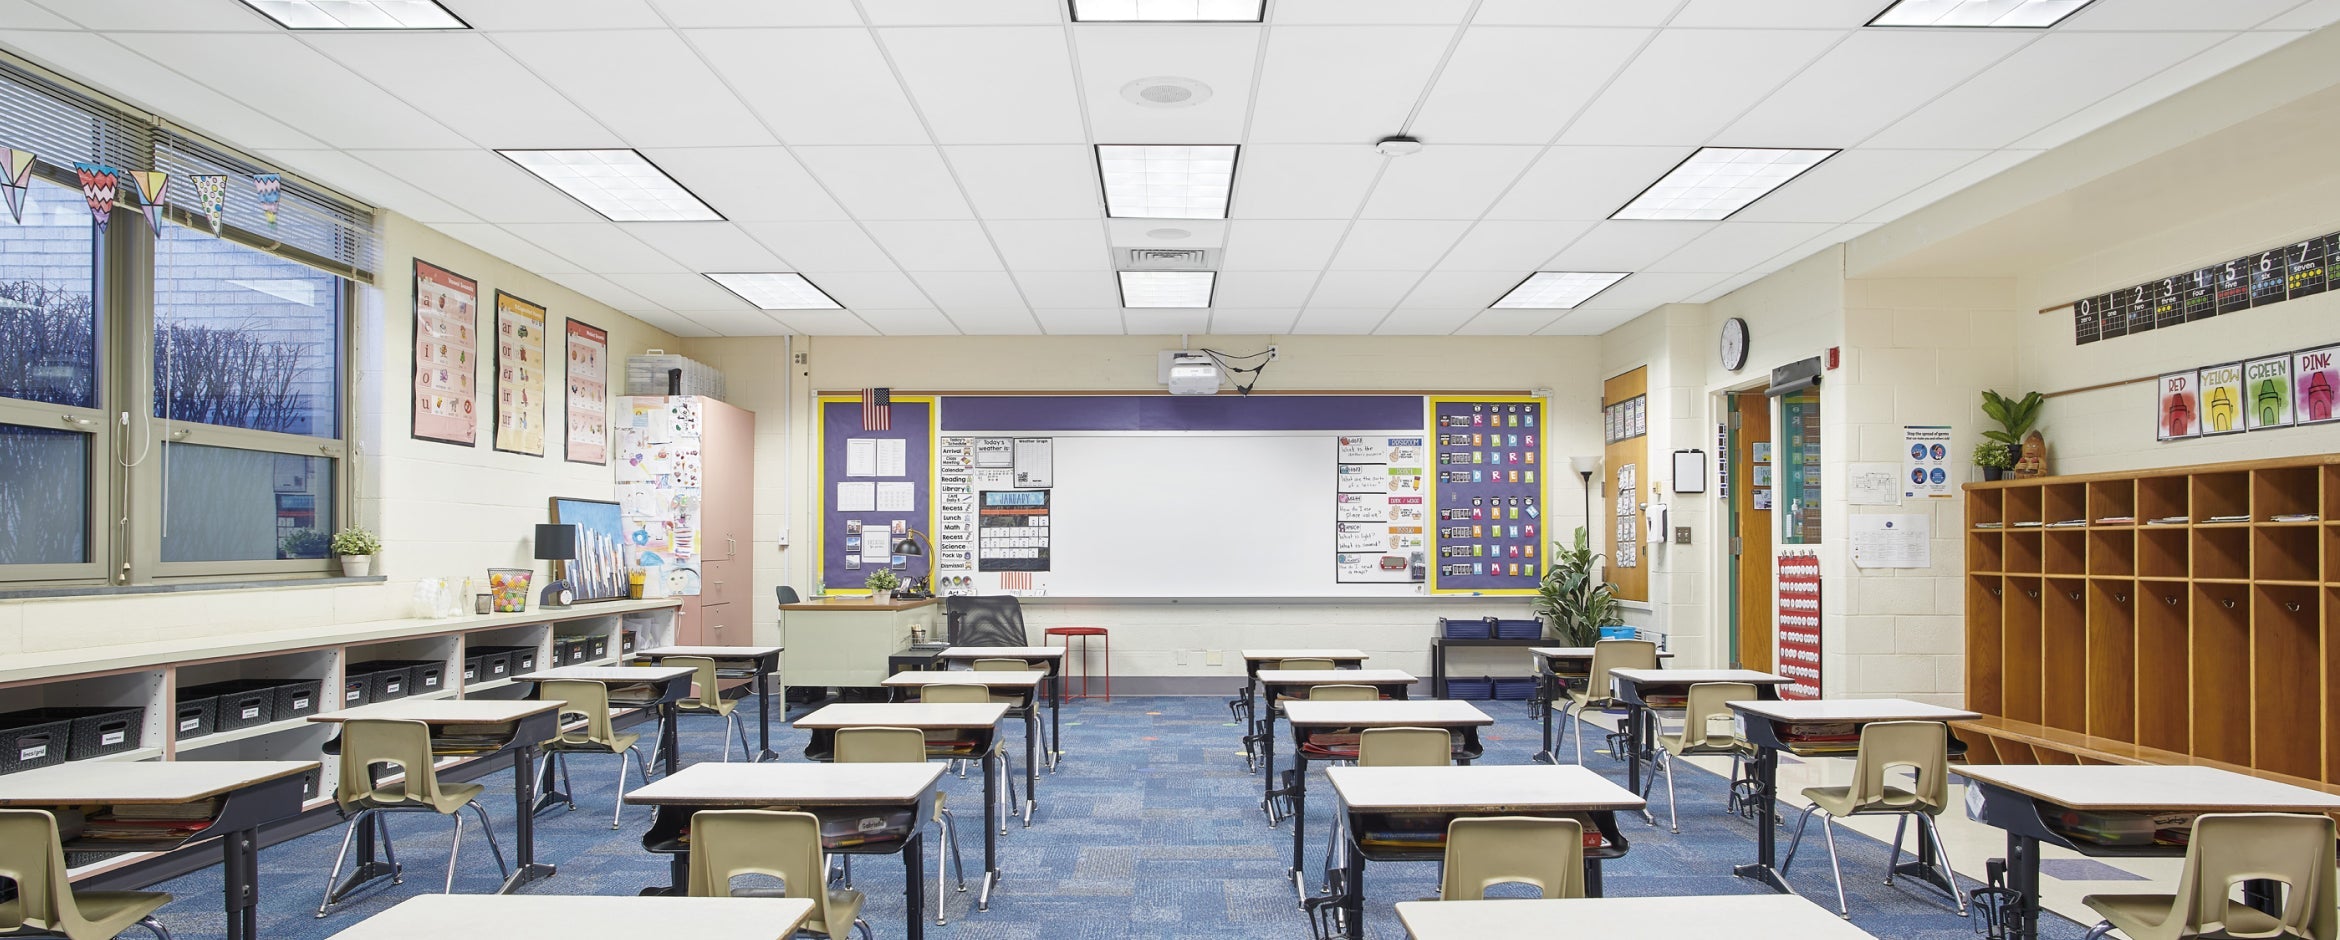 School improvements through ESSER funding– how can the ceiling help?